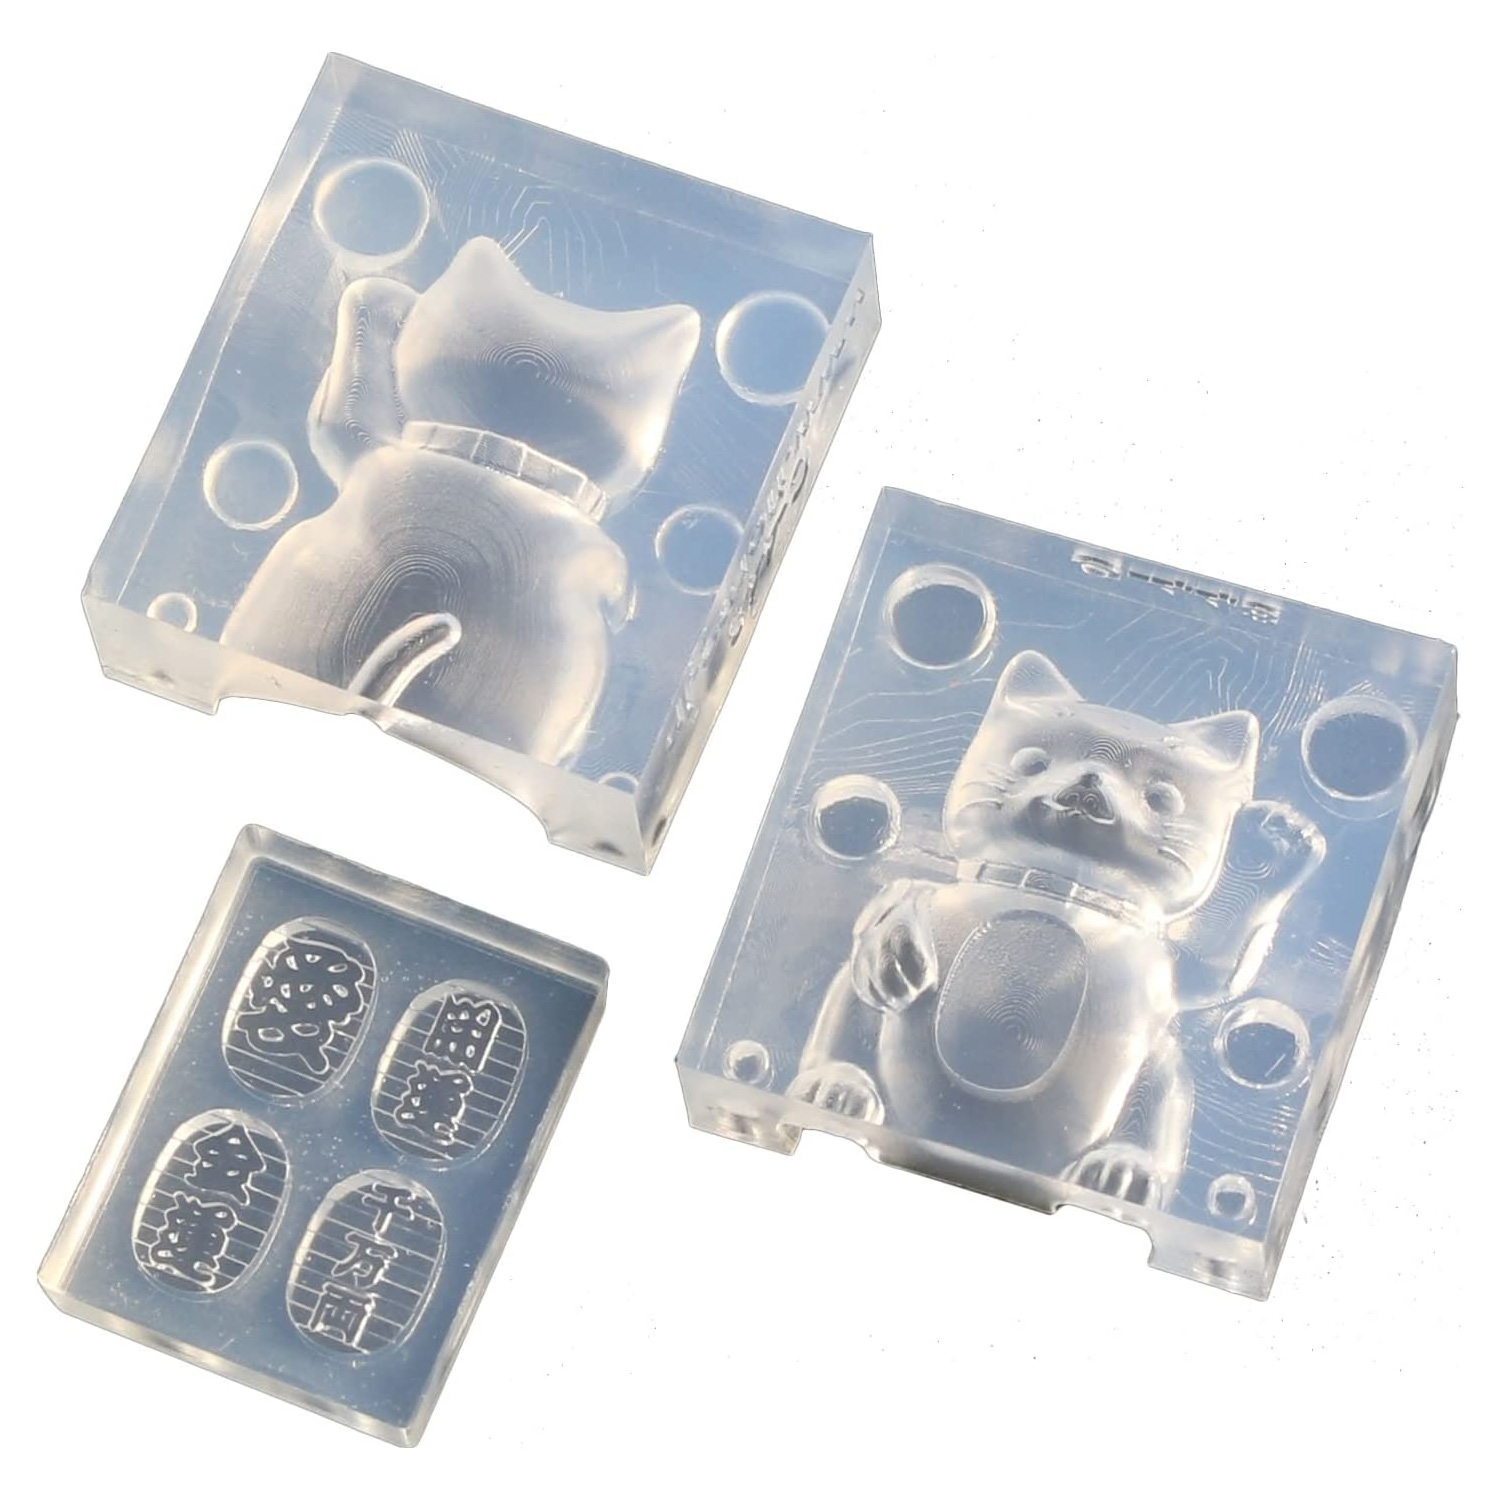 KAM-REJ-448  Resin Crafting Silicone Mold  (pcs)